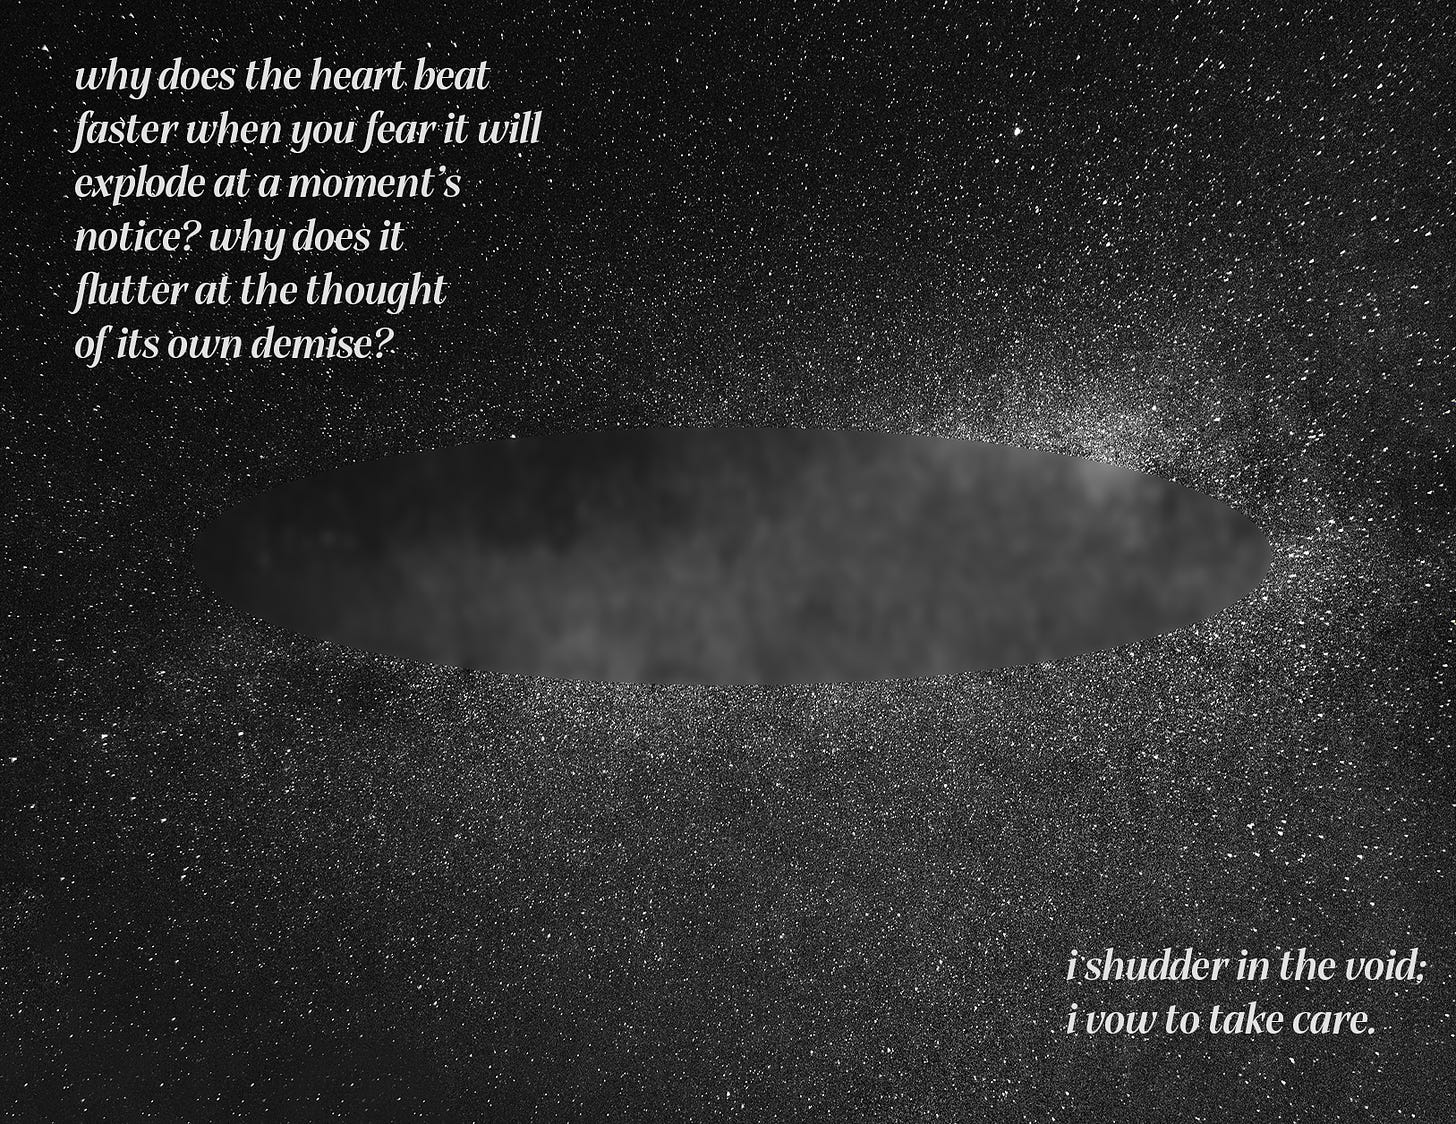 A starry night sky with a blurred void in the center of the image. In the top left corner, white text reads “why does the heart beat / faster when you fear it will / explode at a moment’s / notice? why does it / flutter at the thought / of its own demise?” In the bottom right, white text reads “i shudder in the void; / i vow to take care.”